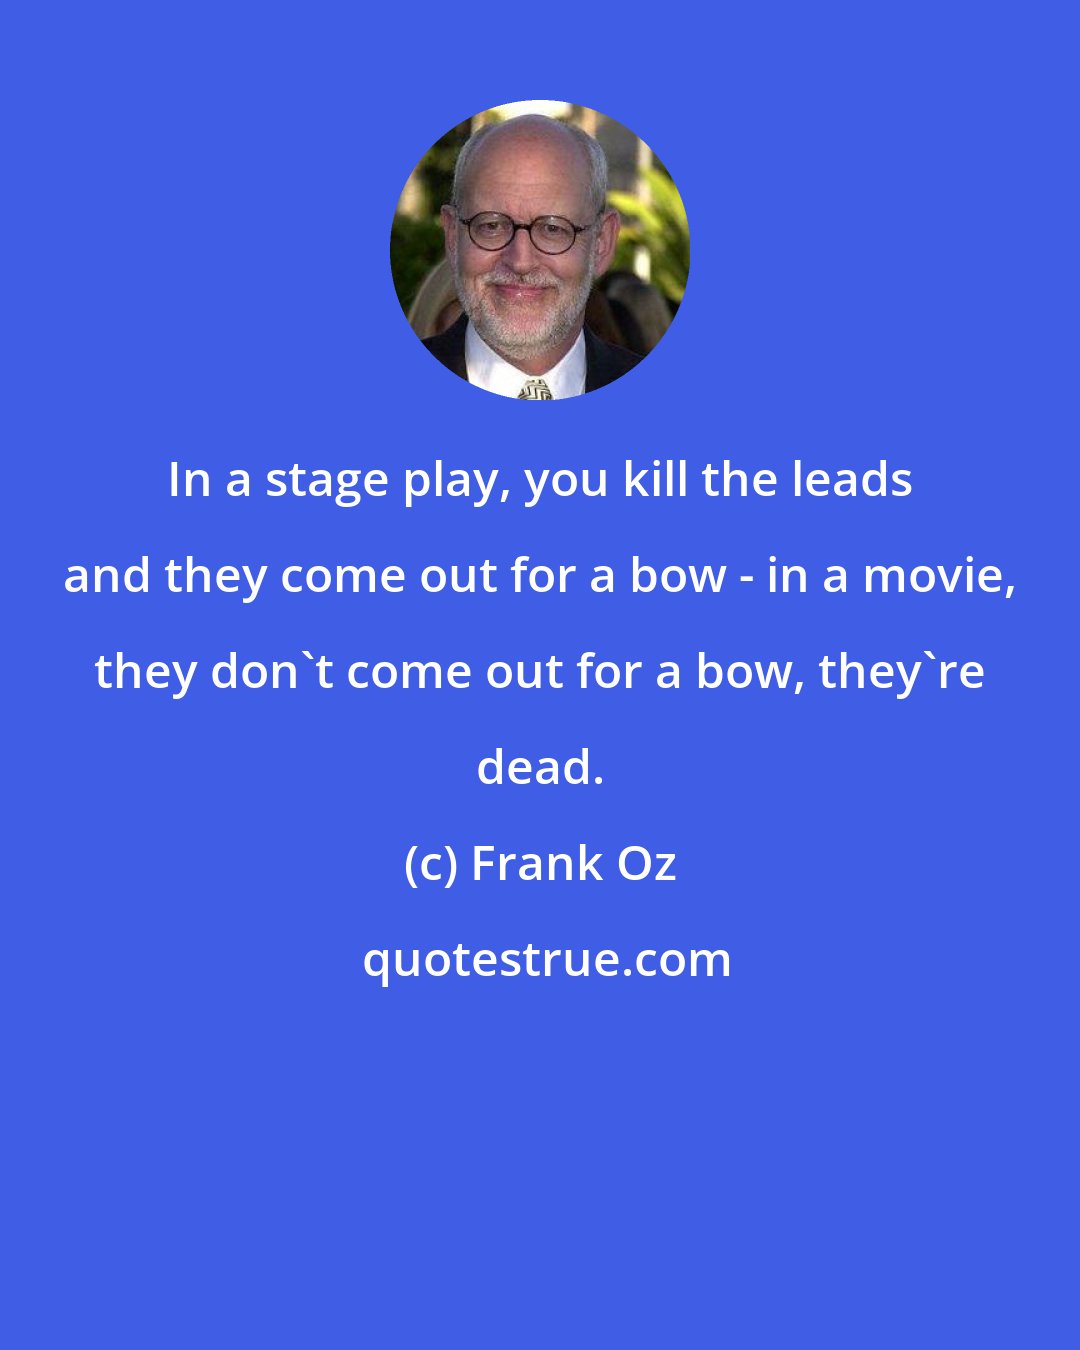 Frank Oz: In a stage play, you kill the leads and they come out for a bow - in a movie, they don't come out for a bow, they're dead.